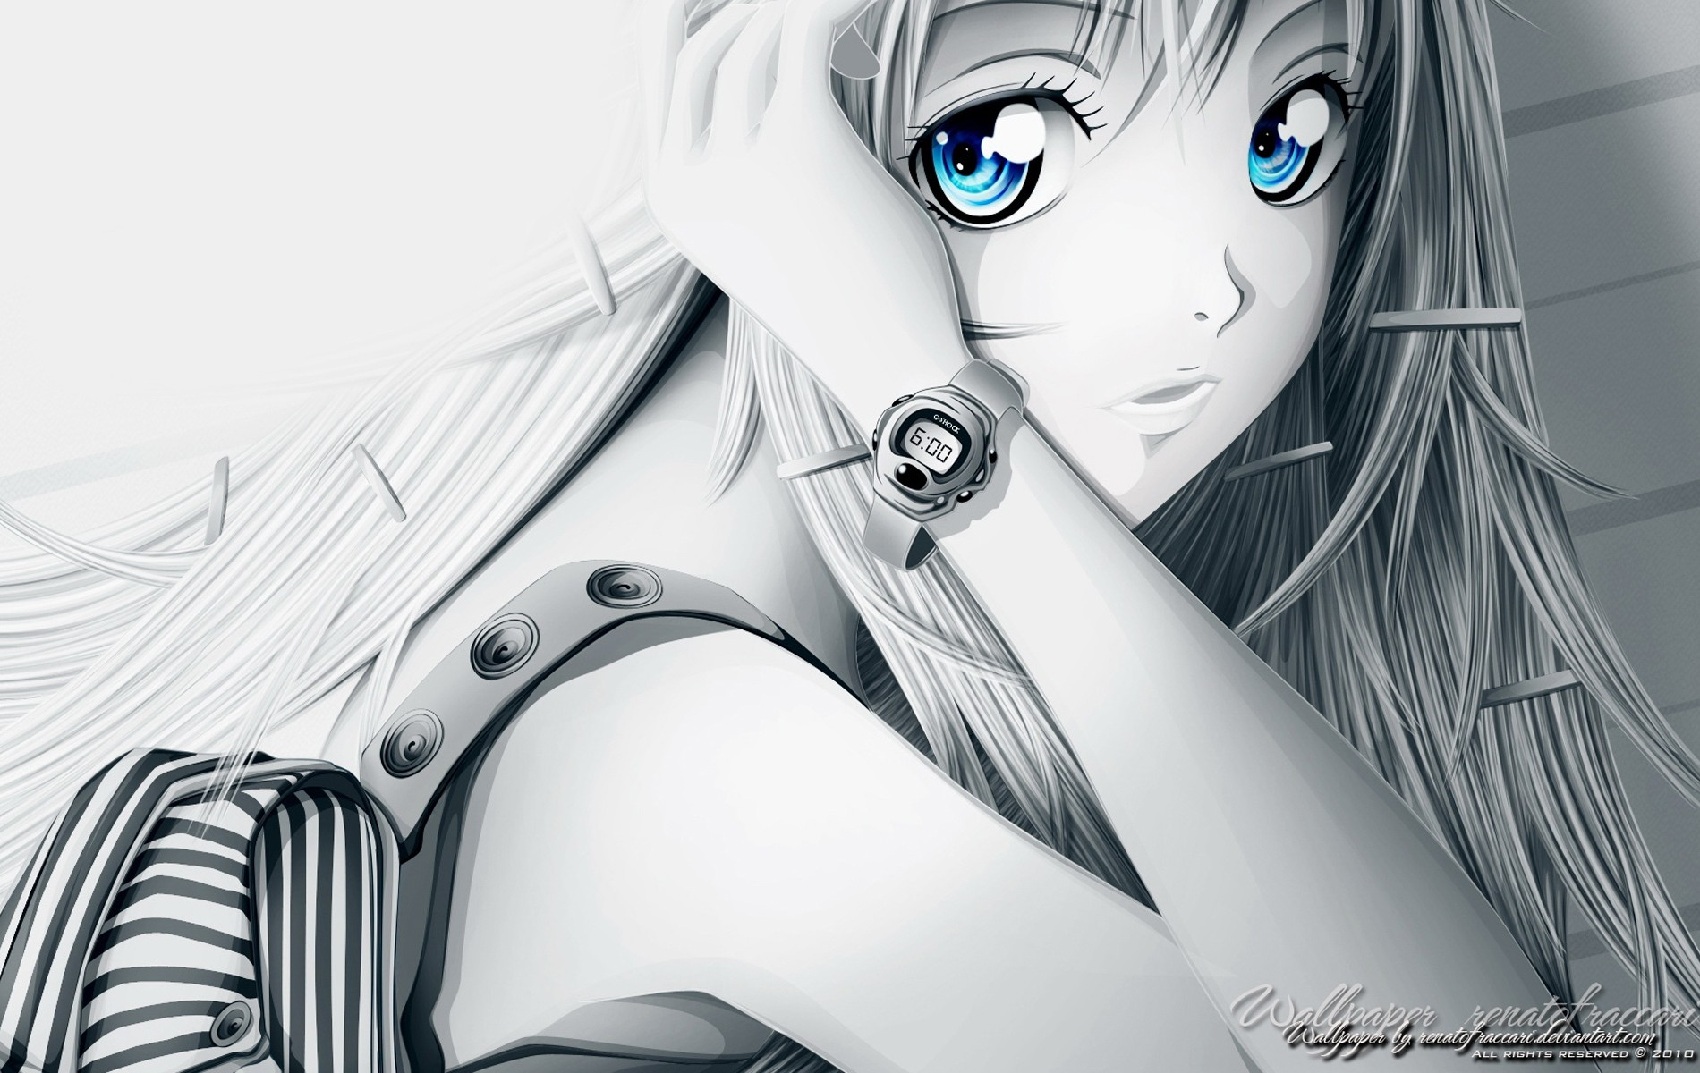 Anime Anime Girls Selective Coloring Blue Eyes 2010 Year 1700x1073